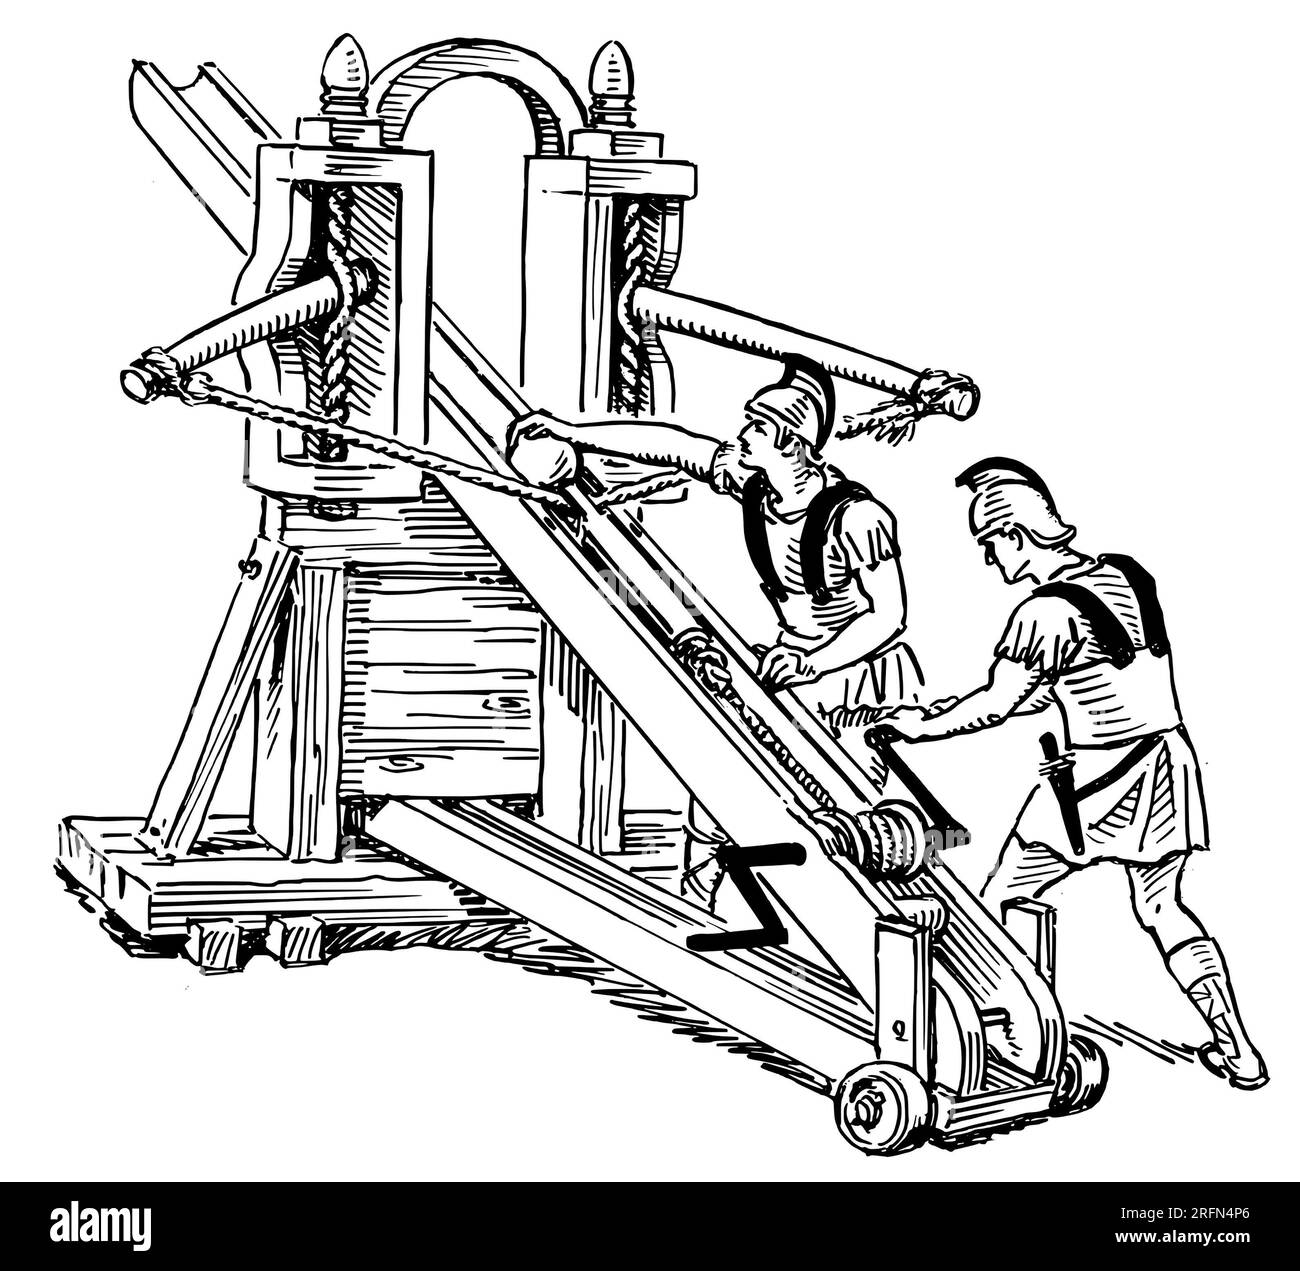 Illustration of a ballista being loaded and drawn. A ballista was an ...